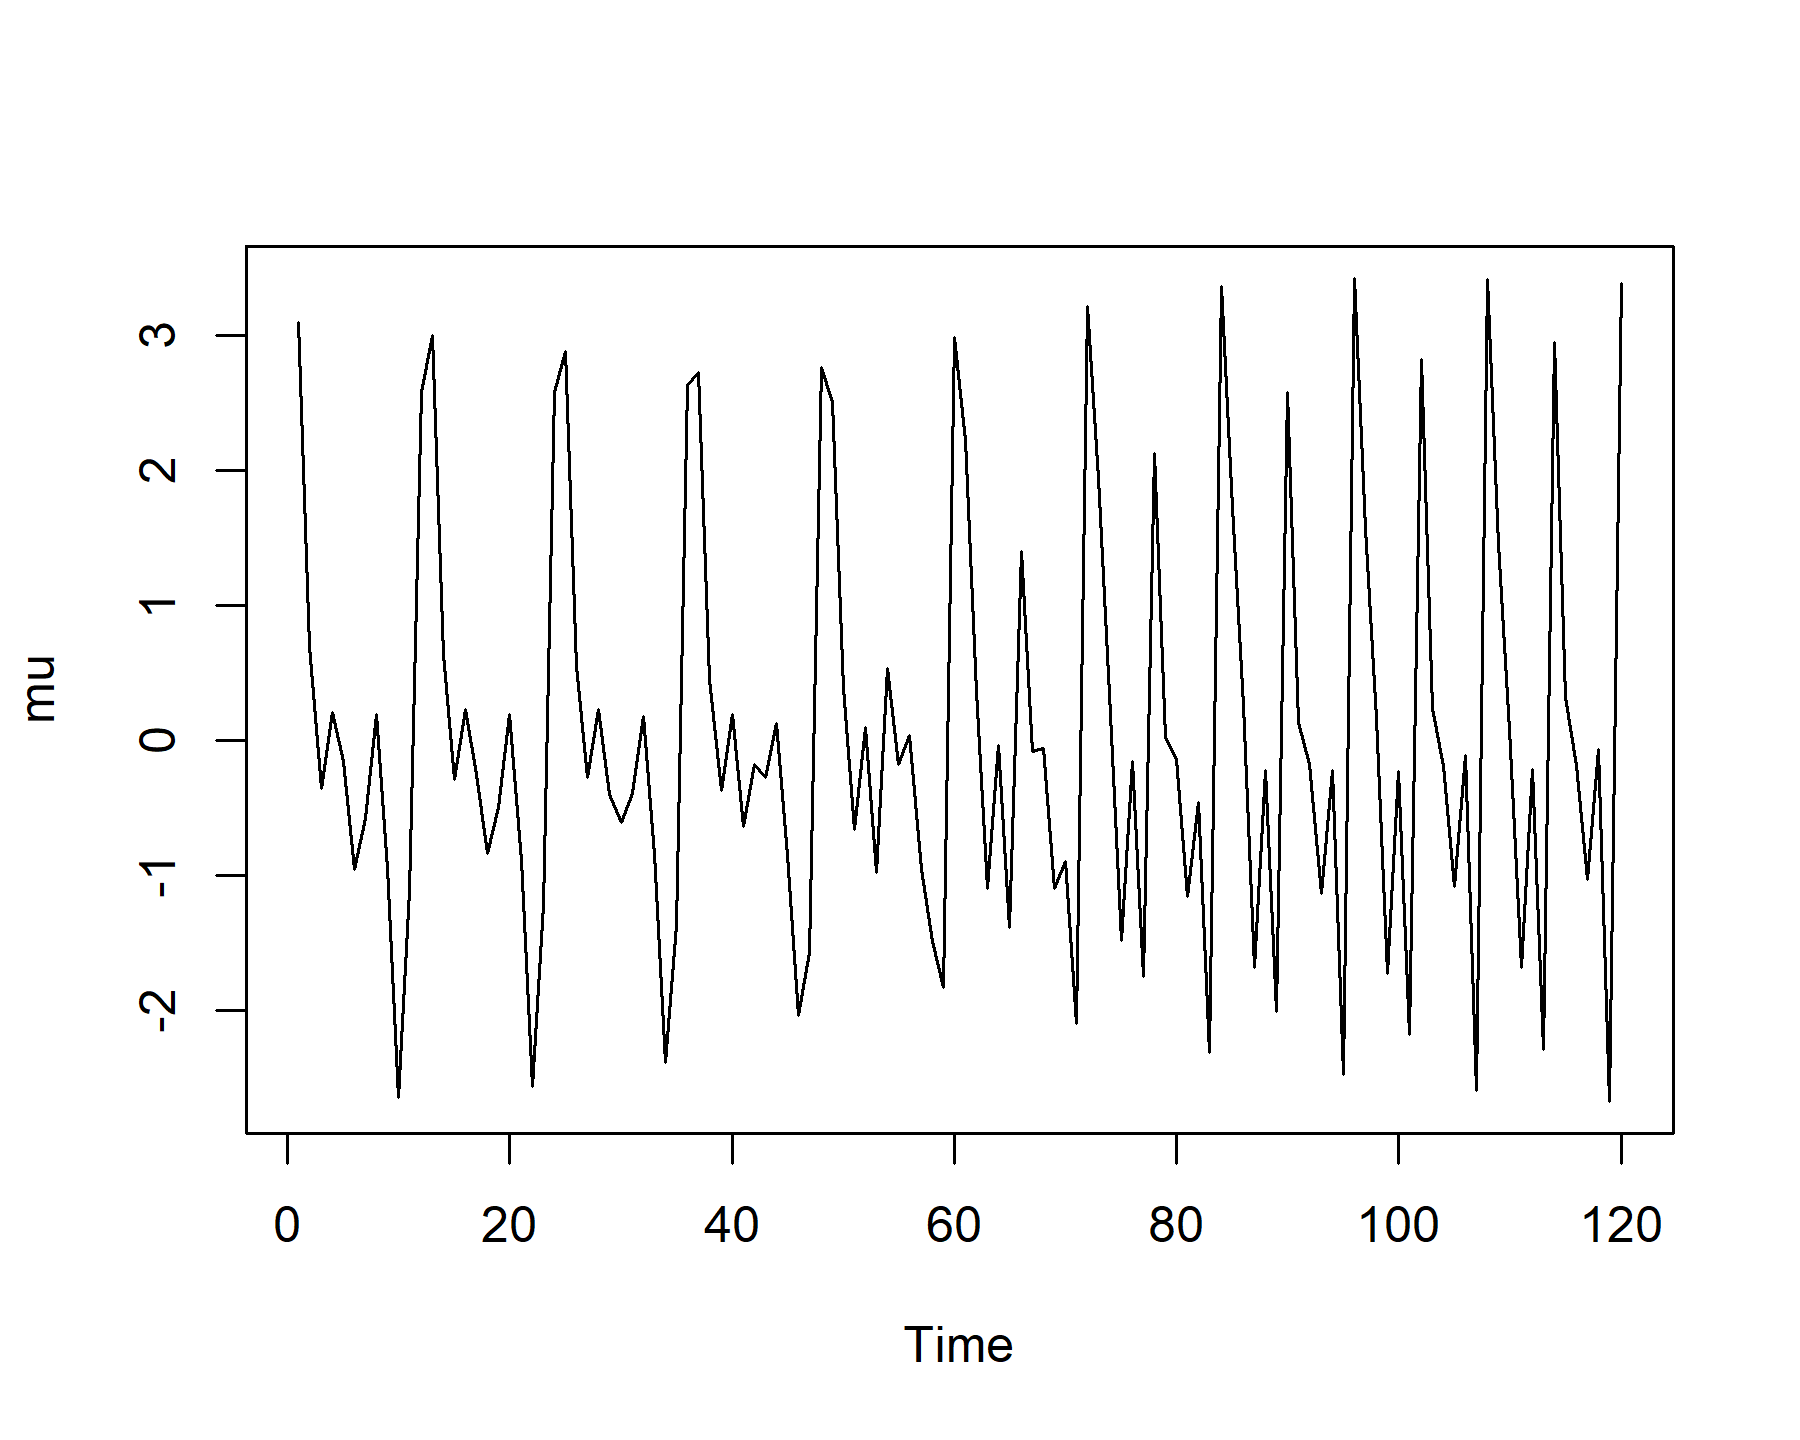 Time-varying periodicity simulated in R